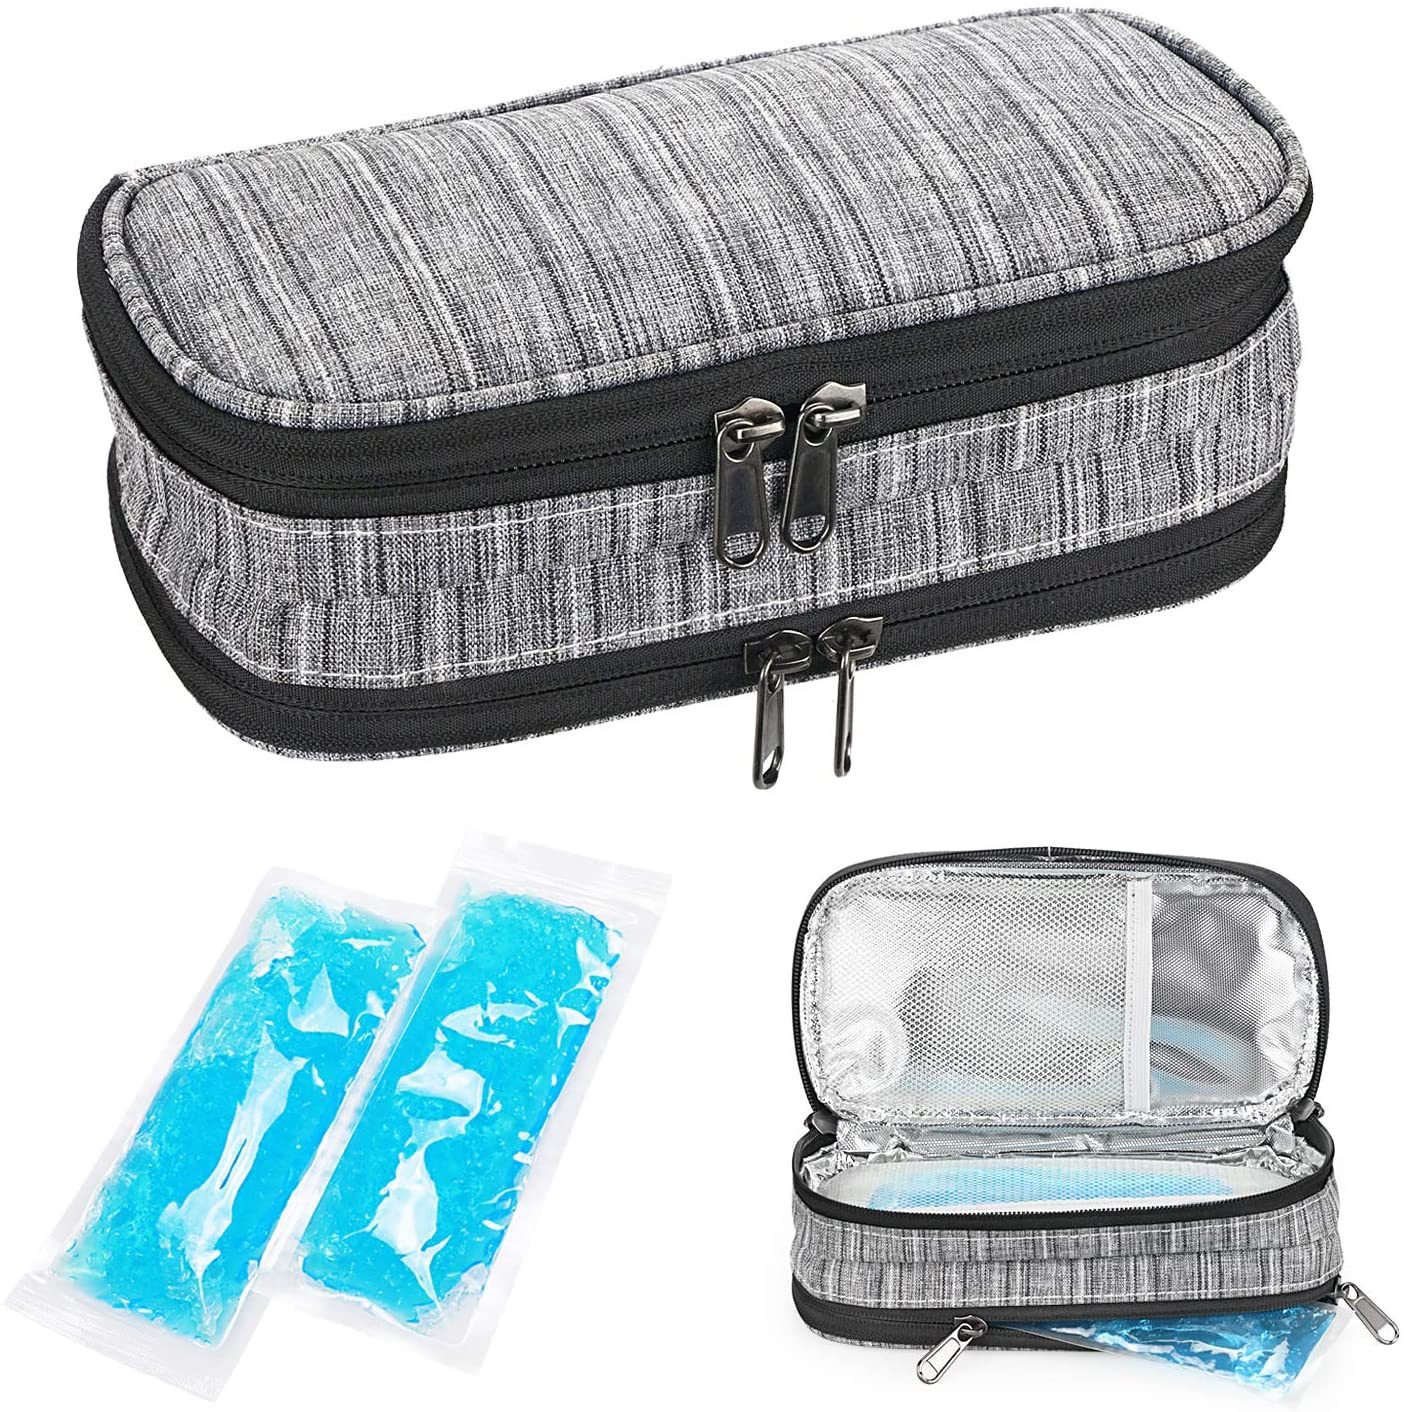 YOUSHARES Insulin Cooler Travel Case, Double Layer Handy Medication Insulated Diabetic Carrying Cooling Bag for Insulin Pen